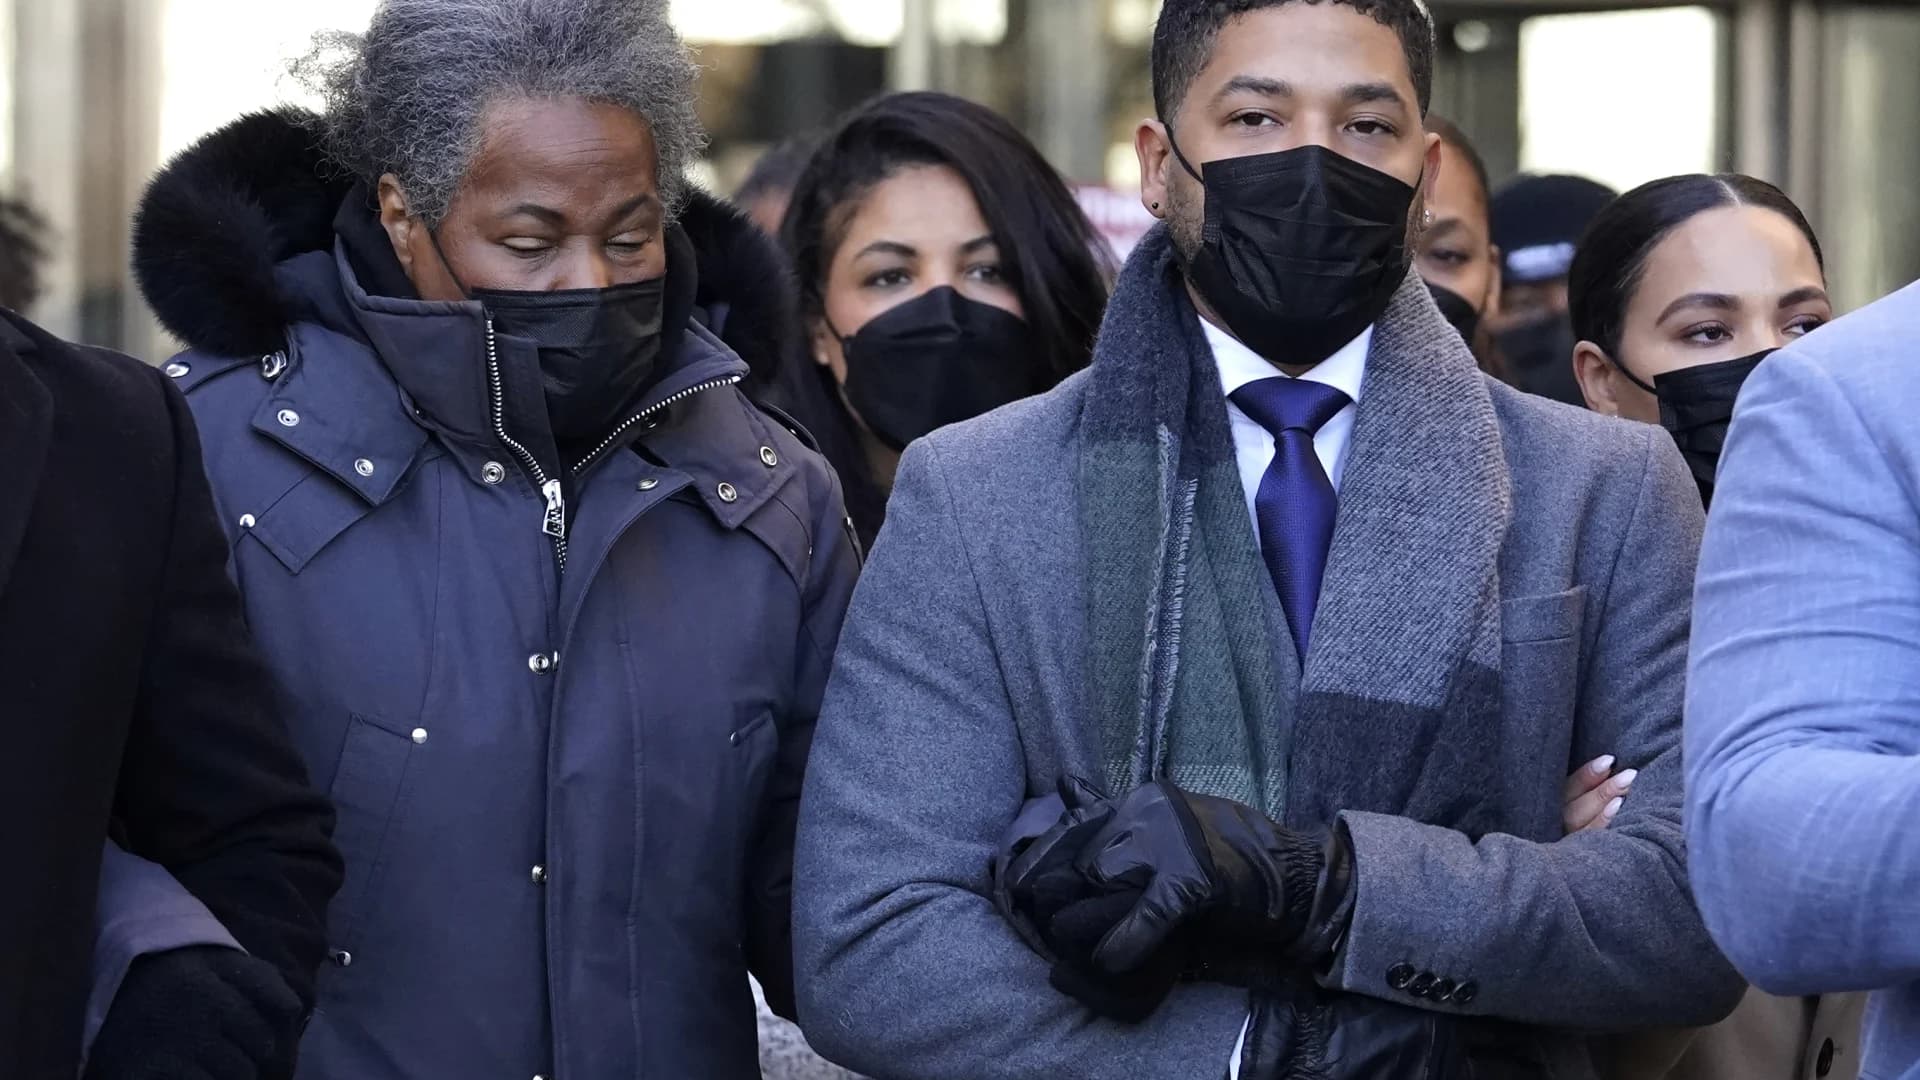 Jussie Smollett convicted of staging attack, lying to police